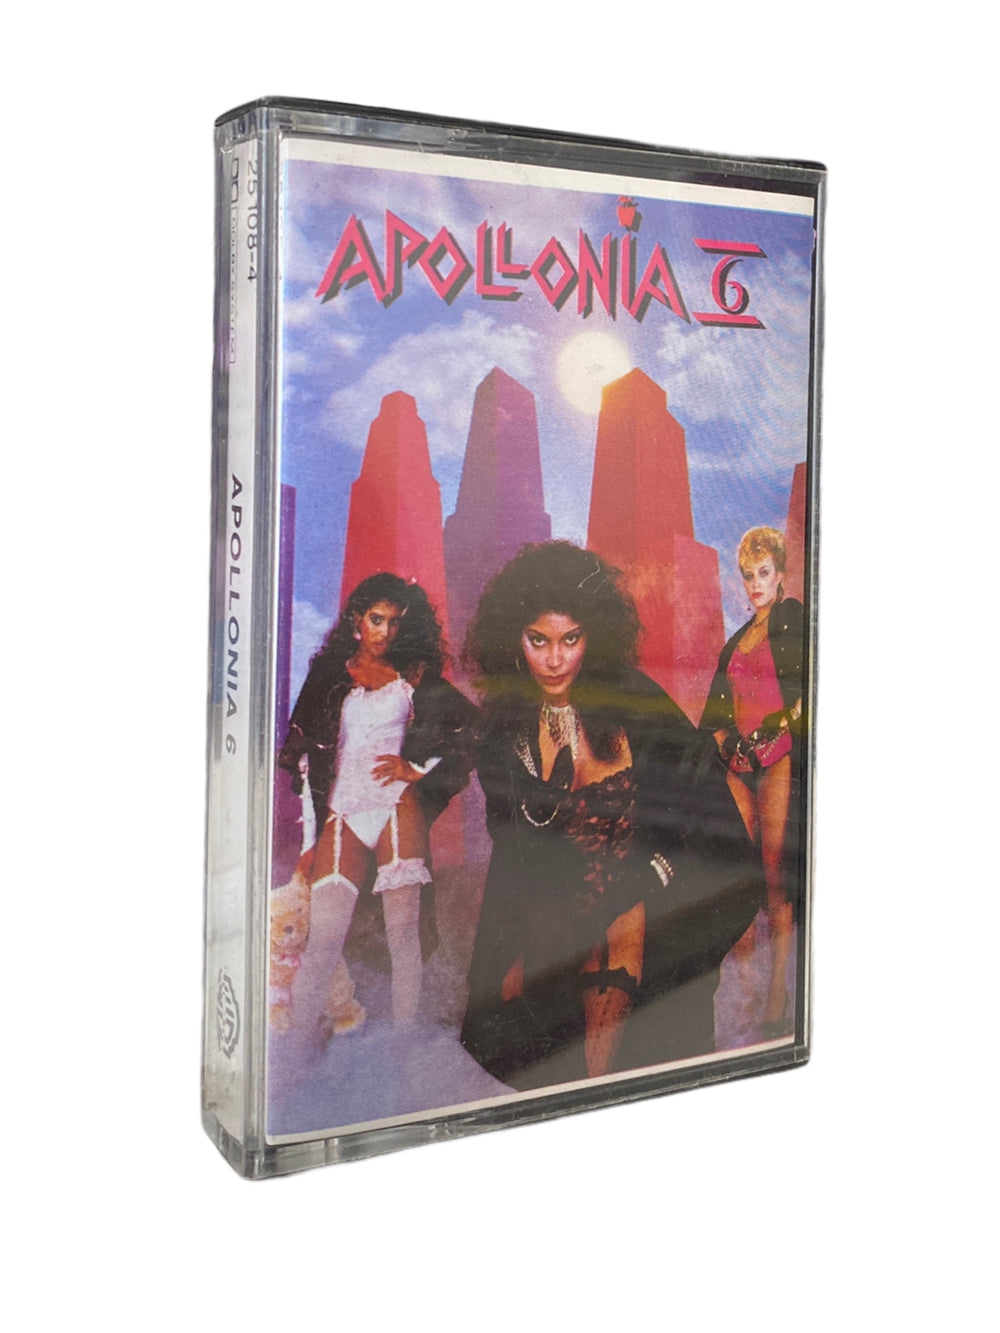 Apollonia 6 Self Titled Tape Cassette WB Records New Zealand Release Prince